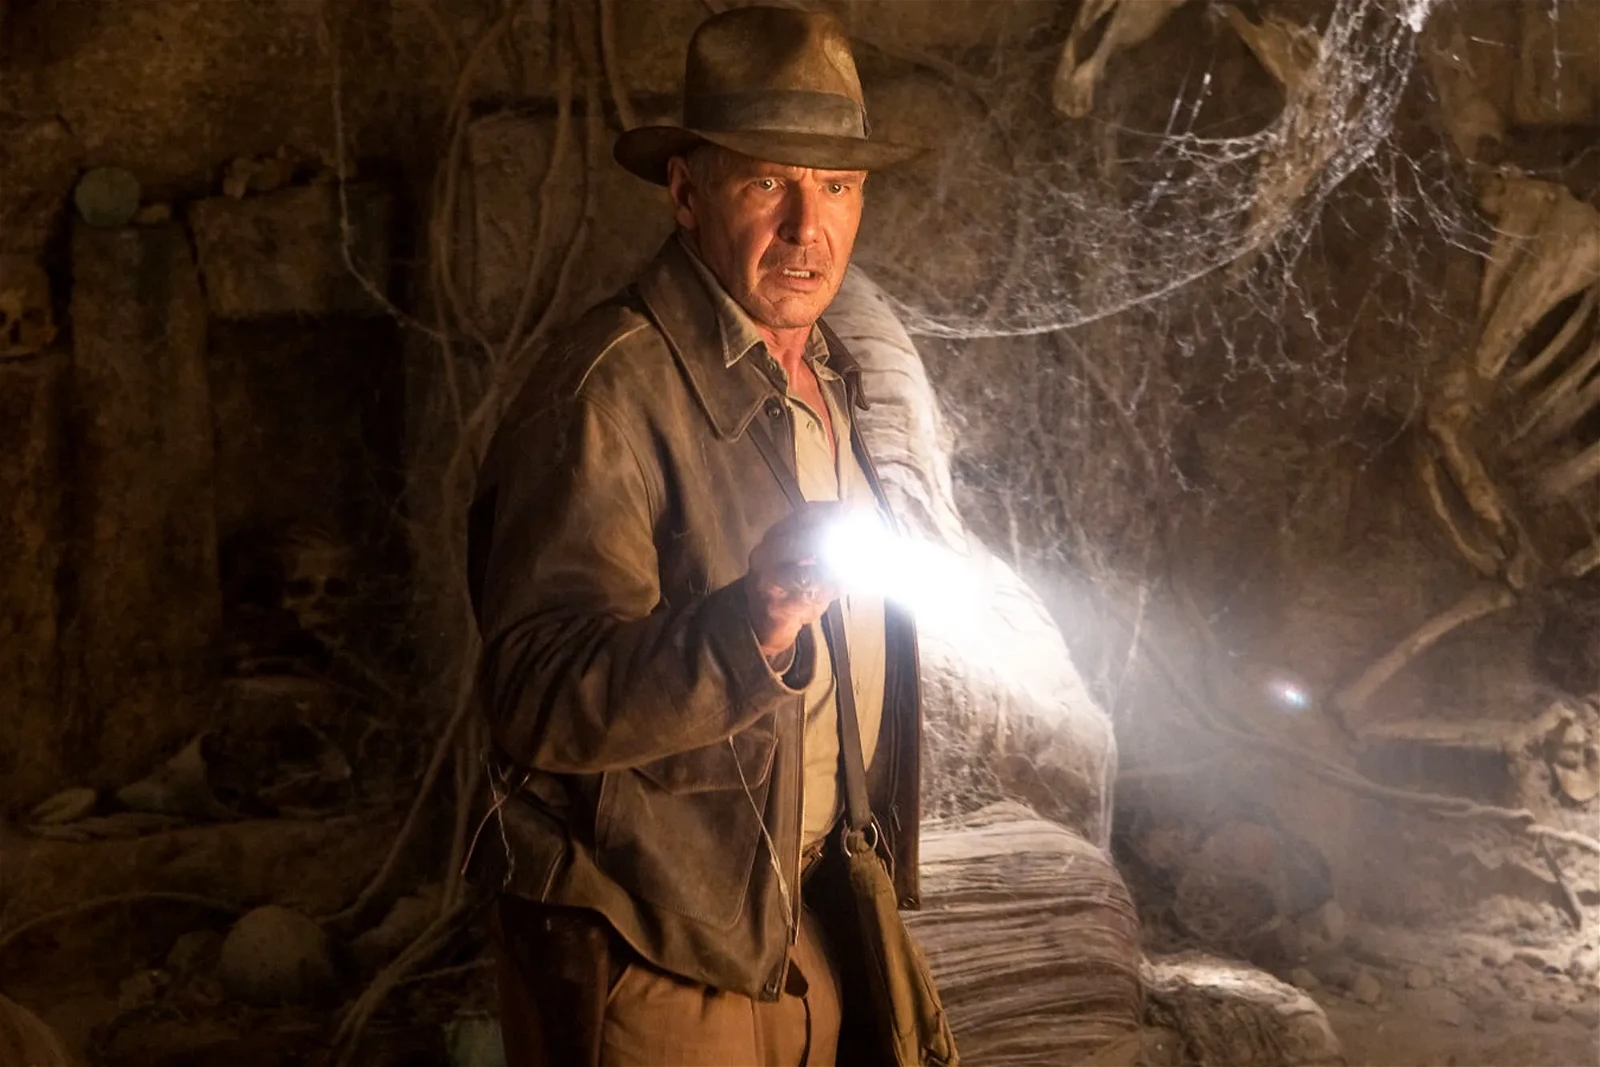 Harrison Ford as Indiana Jones in the Indiana Jones franchise.